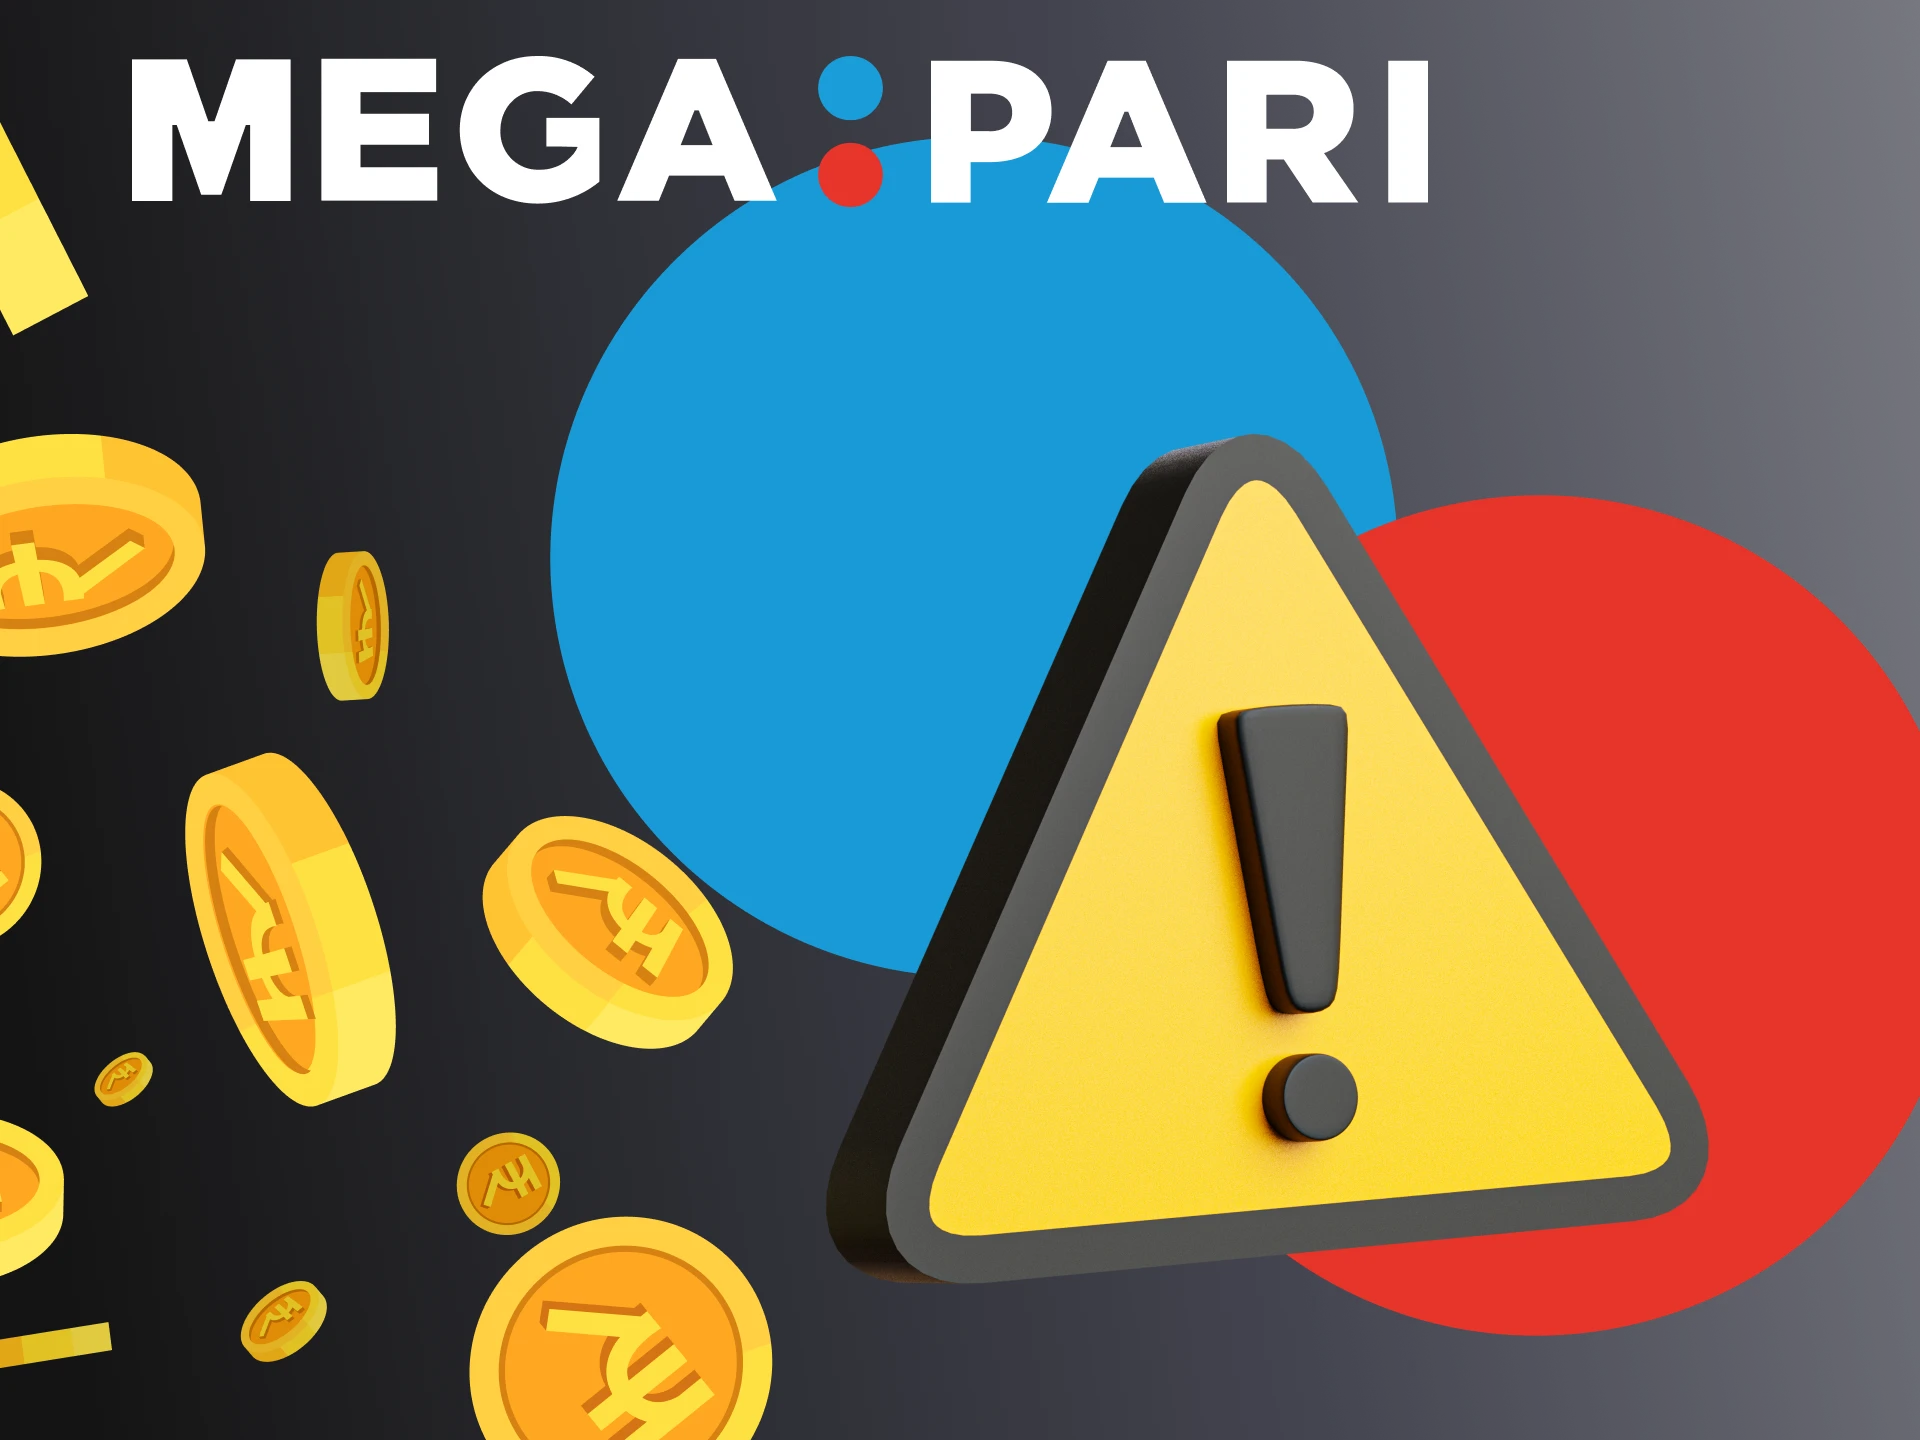 Read the main points at which you may have problems with your Megapari deposit.